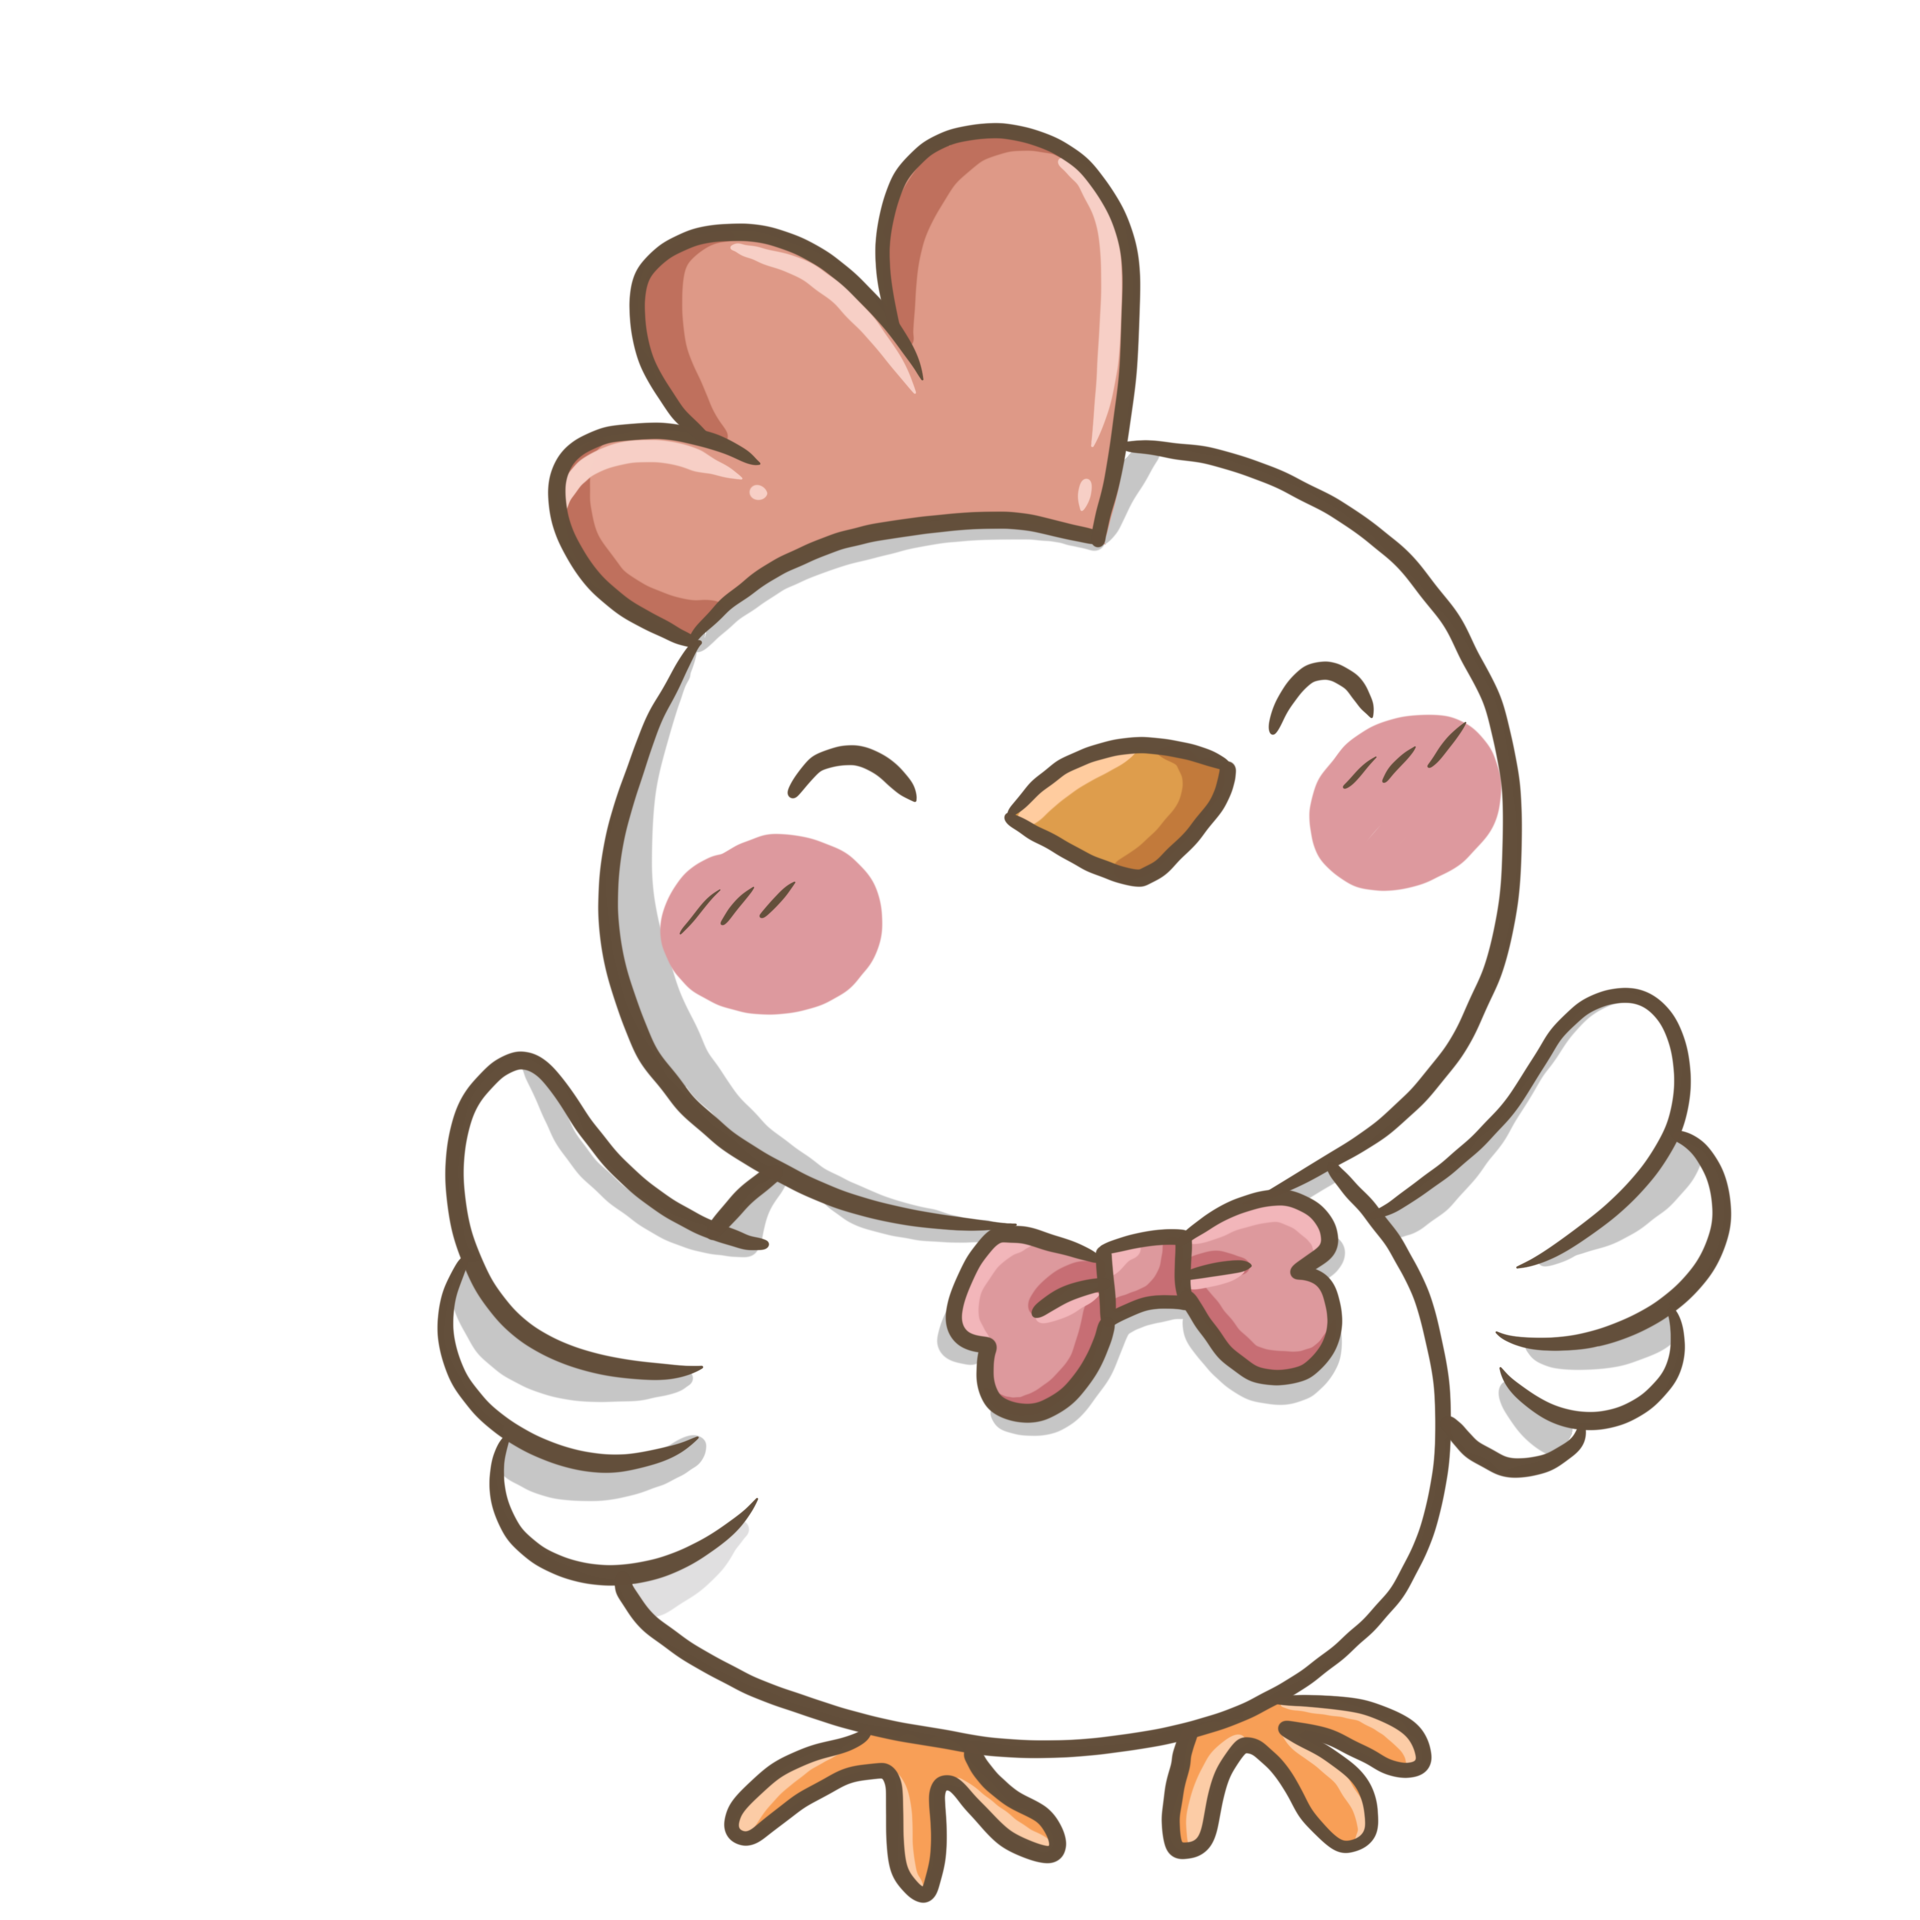 Free cartoon chicken doodle kawaii anime coloring page cute illustration drawing clipart character chibi manga â kawaii anime drawing clipart cartoon chicken